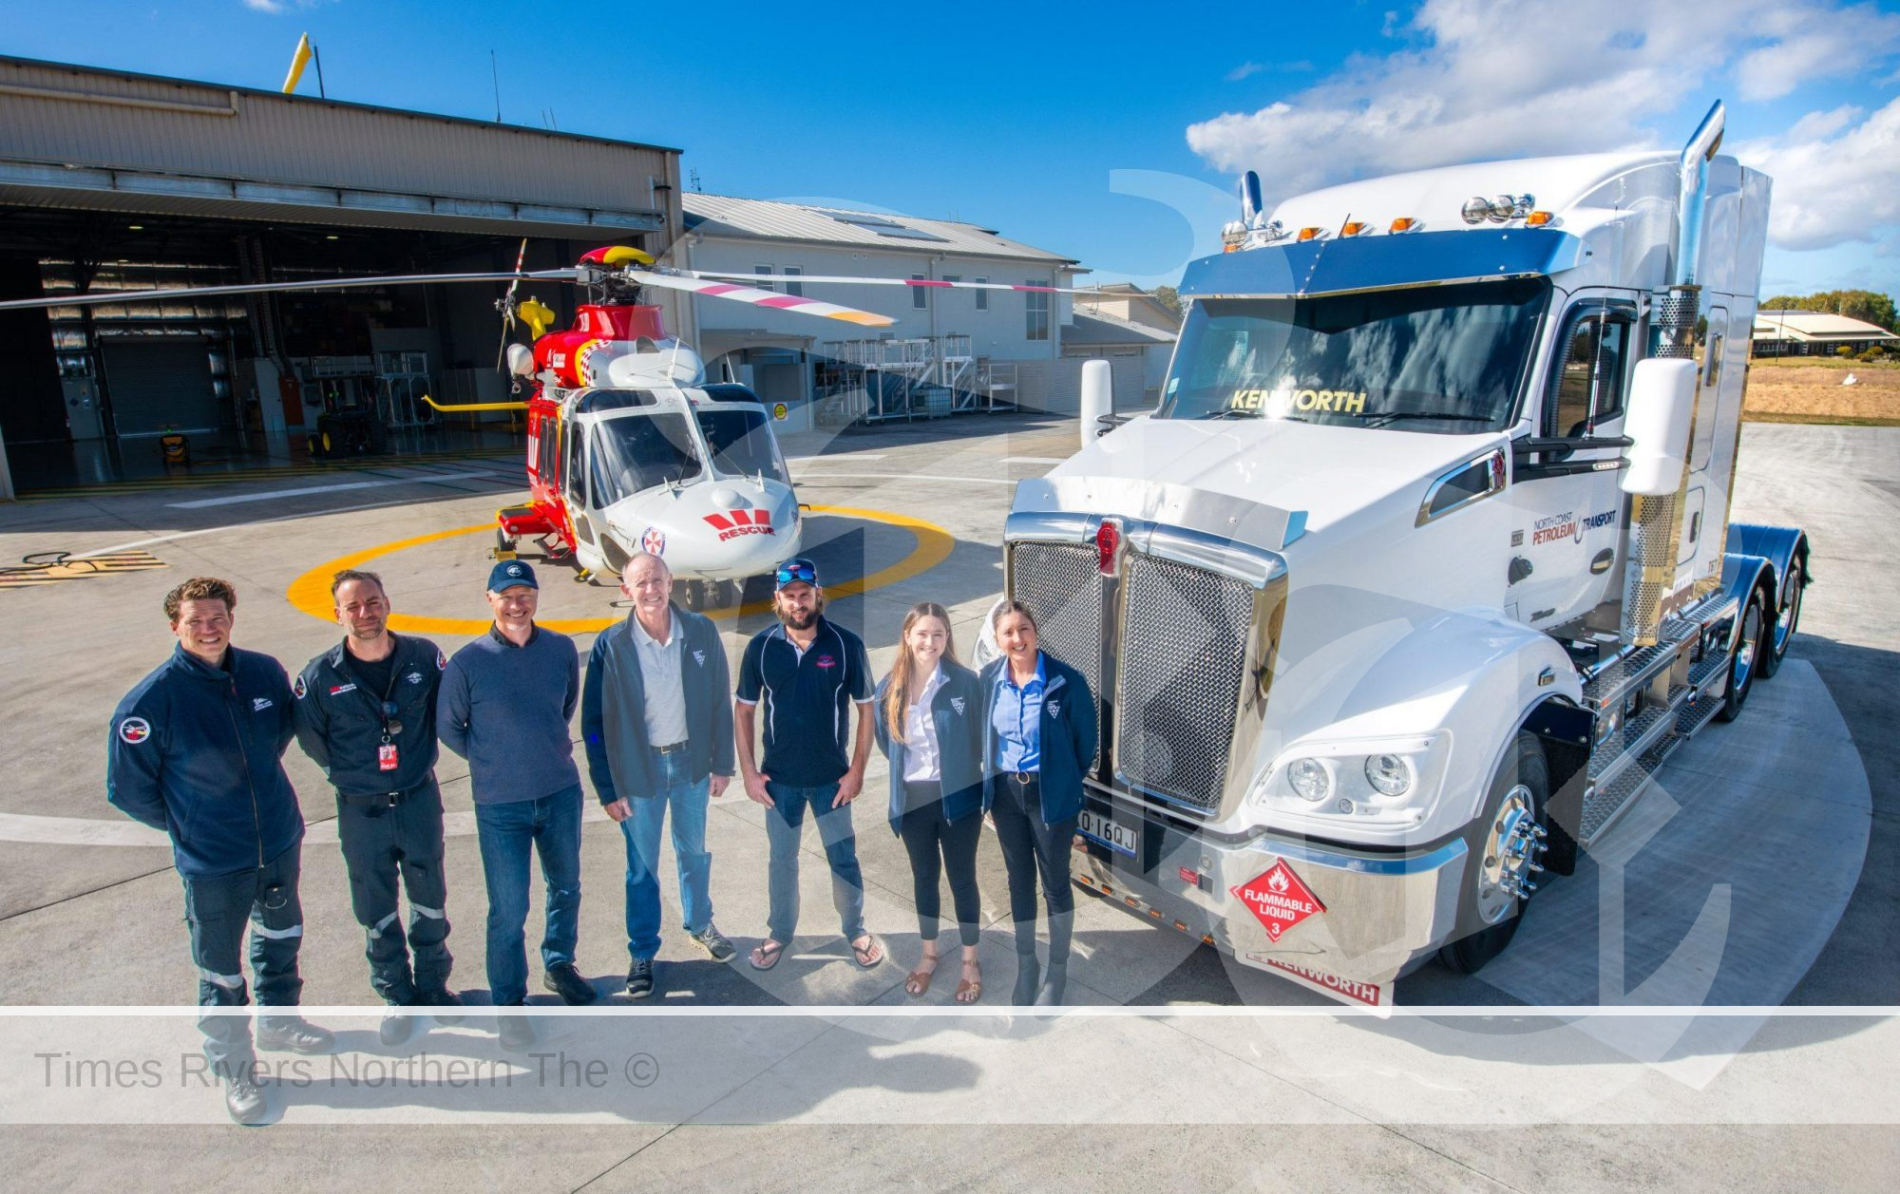 Group of people standing in front of a truck and a wetspac helicopter